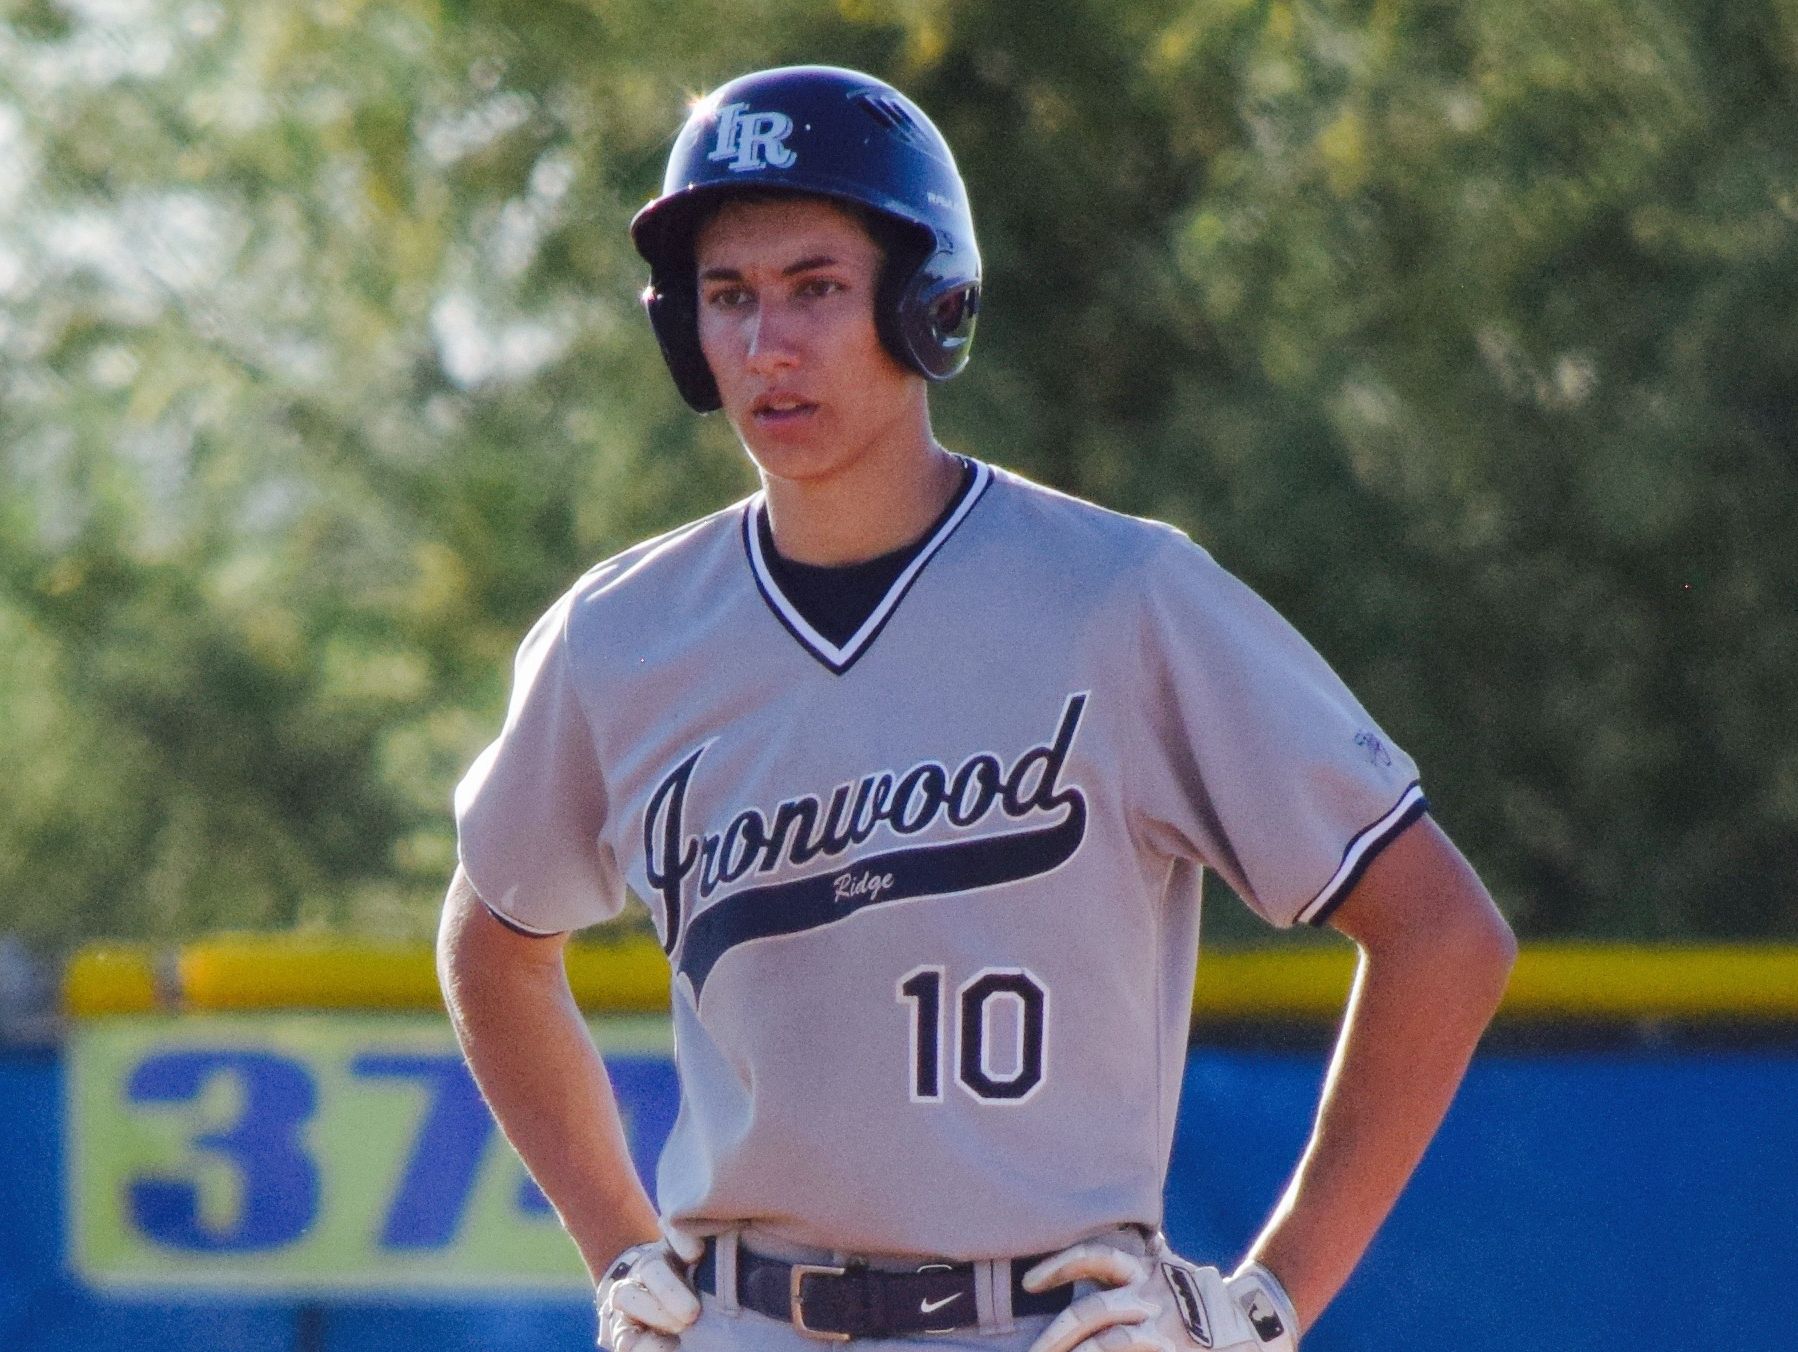 Derek Daly, from Tucson Ironwood Ridge, is azcentral sports' Male Athlete of the Week, presented by La-Z-Boy Furniture Galleries, for April 28-May 5.